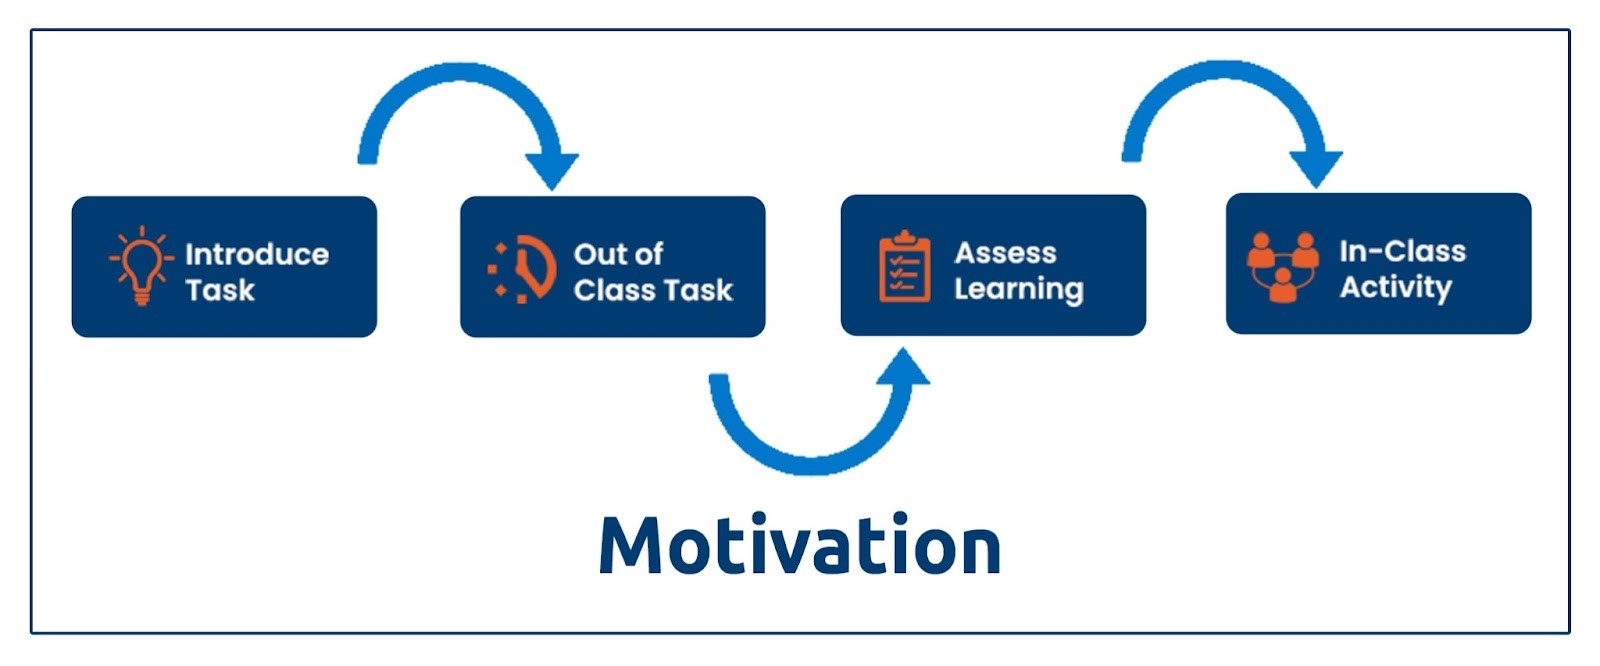 Planning model for flipped classes. This flowchart starts with introducing the task, then "out of class task". This is followed by "assess learning" and lastly "in-class activity"